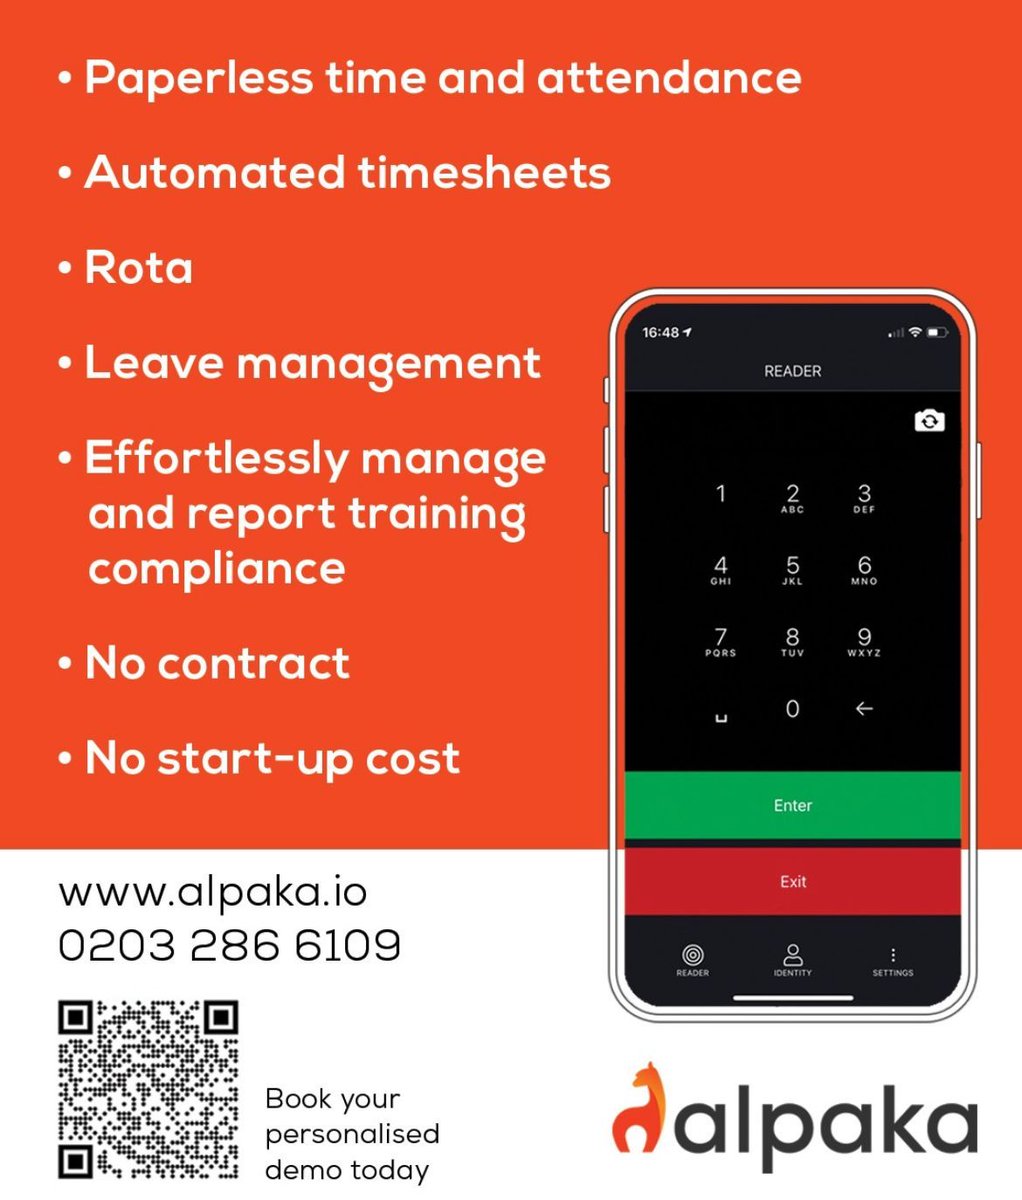 Its time to Spring clean your employee management process! 

If you are using a paper or out of date process we can help, Alpaka is #EmployeeManagement for Care.

#RotaPlanning #HRTech #AbsenceManagement #LeaveManagement #TimeandAttendance #CareHomeManagers